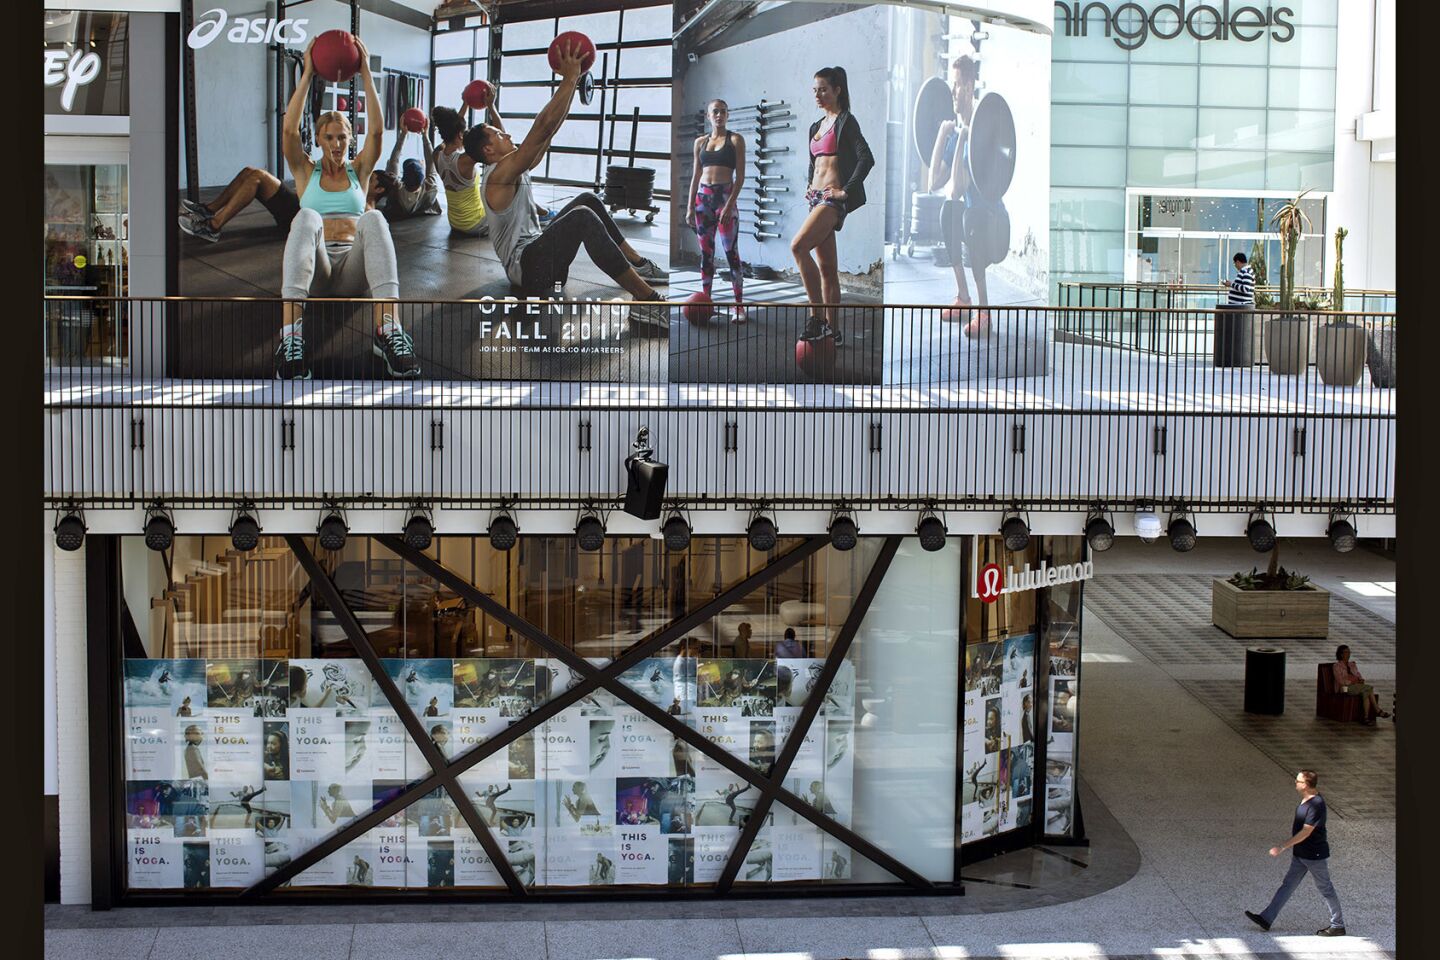 City mall goes deluxe with makeover to entice - Los Angeles Times